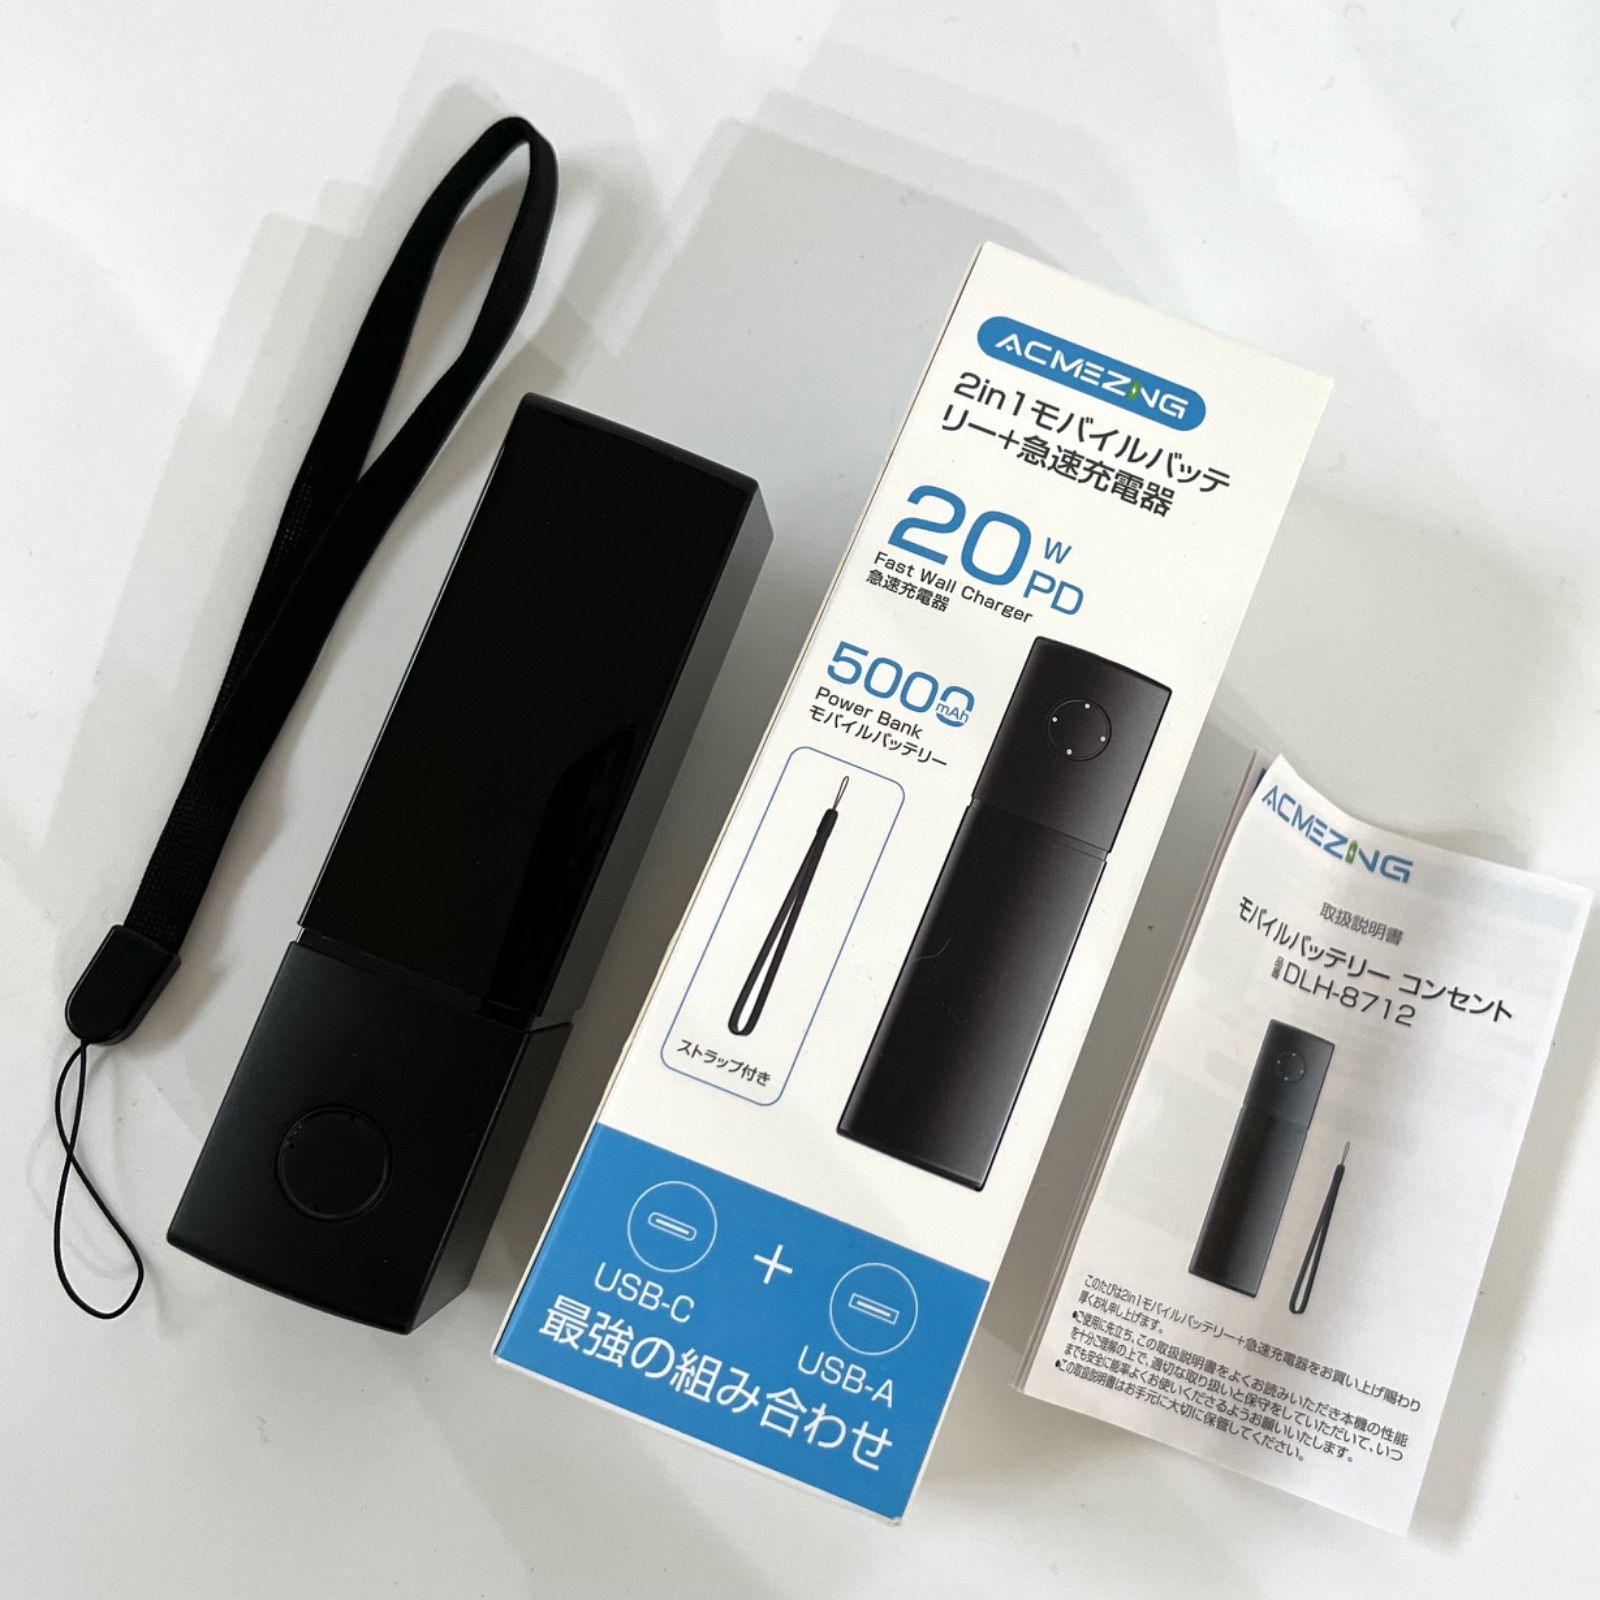 Anker Nano Power Bank (12W, Built-In Lightning Connector) - Miles